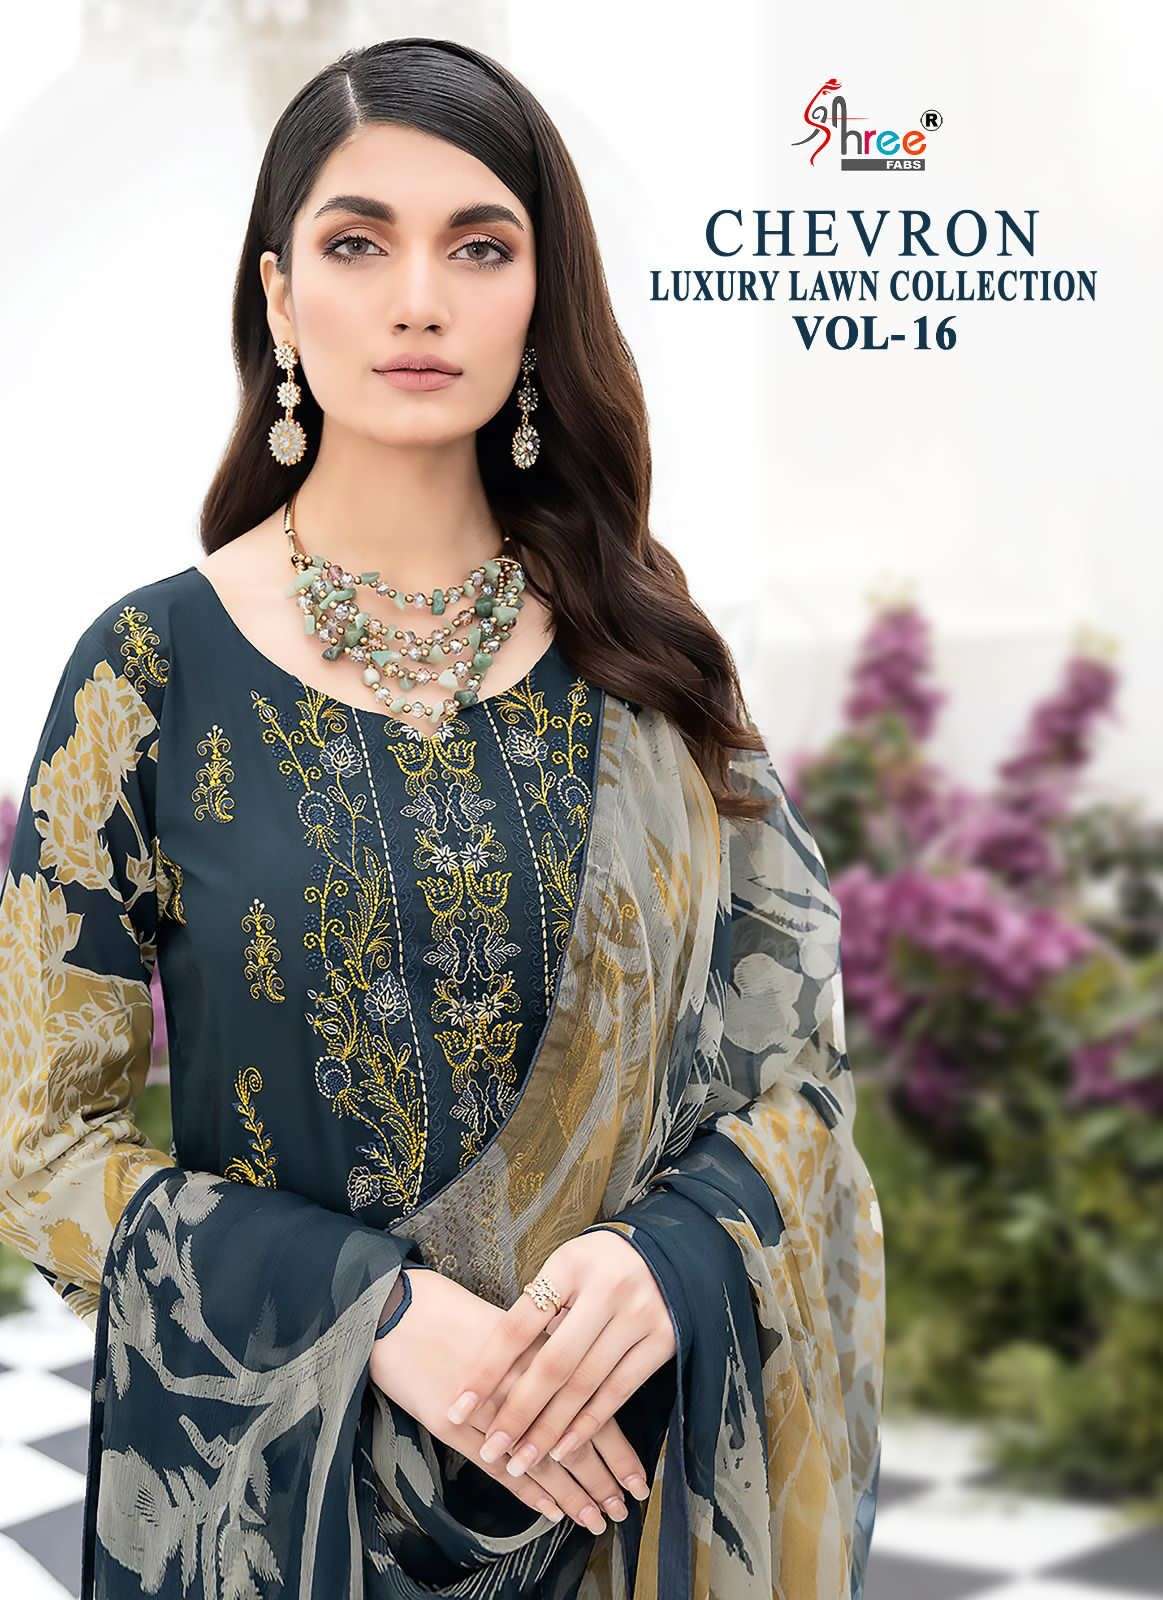 SHREE FAB CHEVRON LUXURY LAWN COLLECTION VOL-16 DESIGNER LAWN COTTON PRINT WITH EMBROIDERY PATCH WORK STYLISH PAKISTANI REPLICA SUITS IN BEST WHOLESALE RATE 